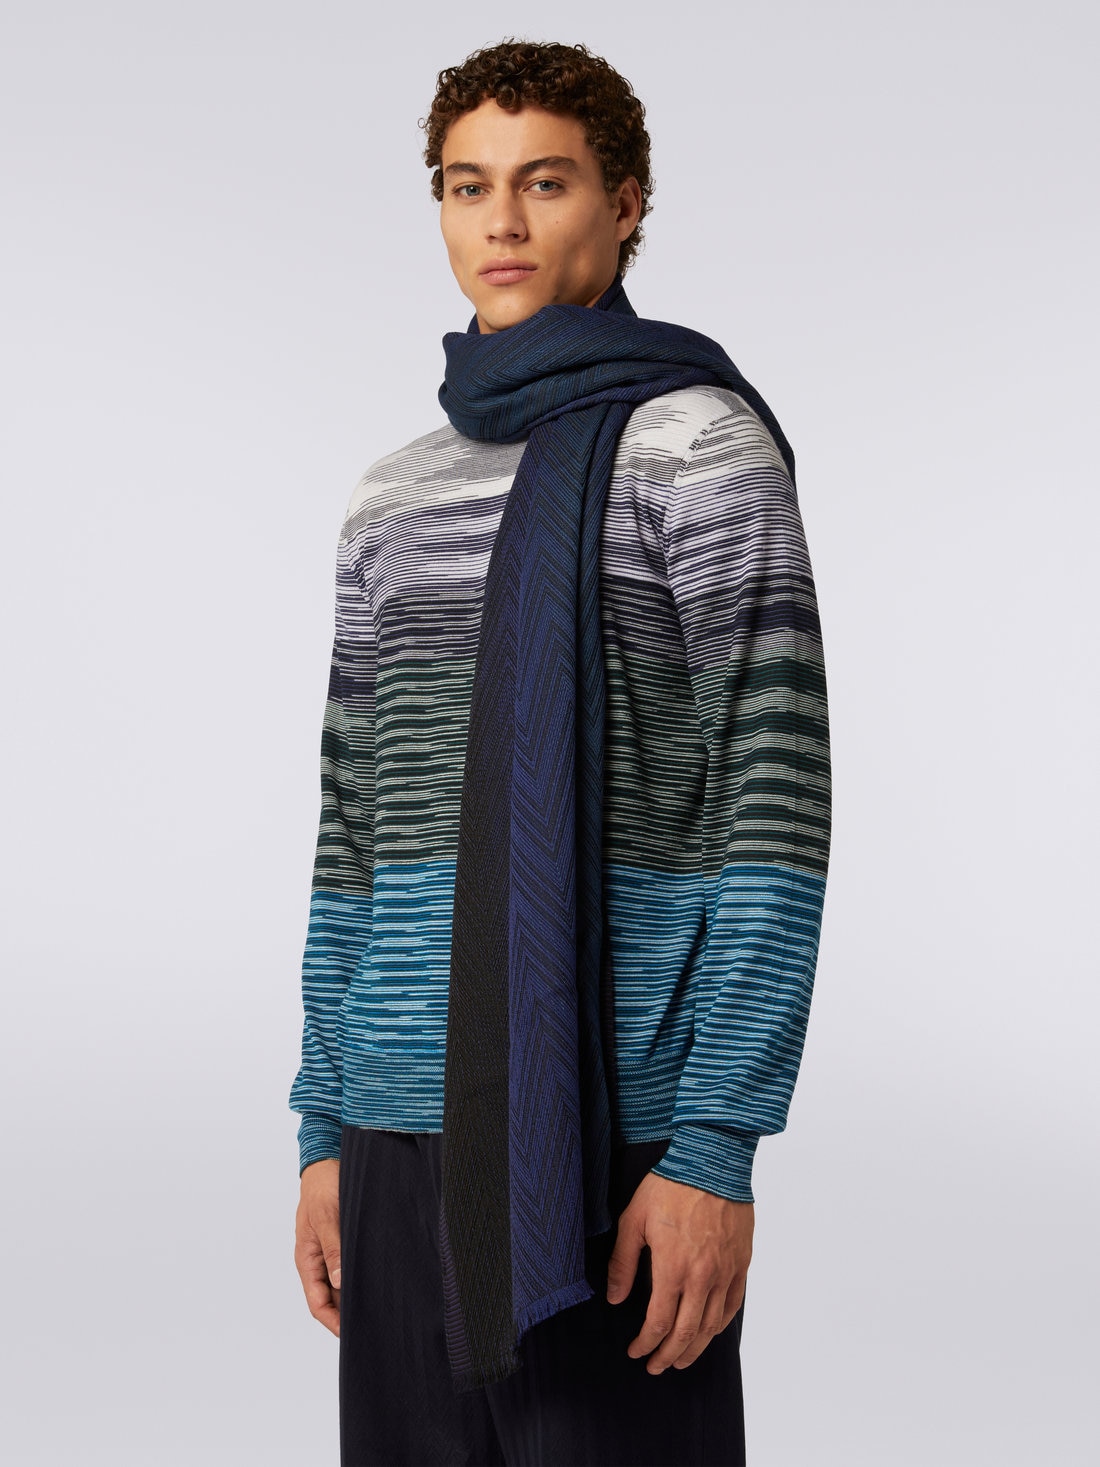 Viscose and wool chevron knit stole with frayed edges, Multicoloured  - 8053147023298 - 2